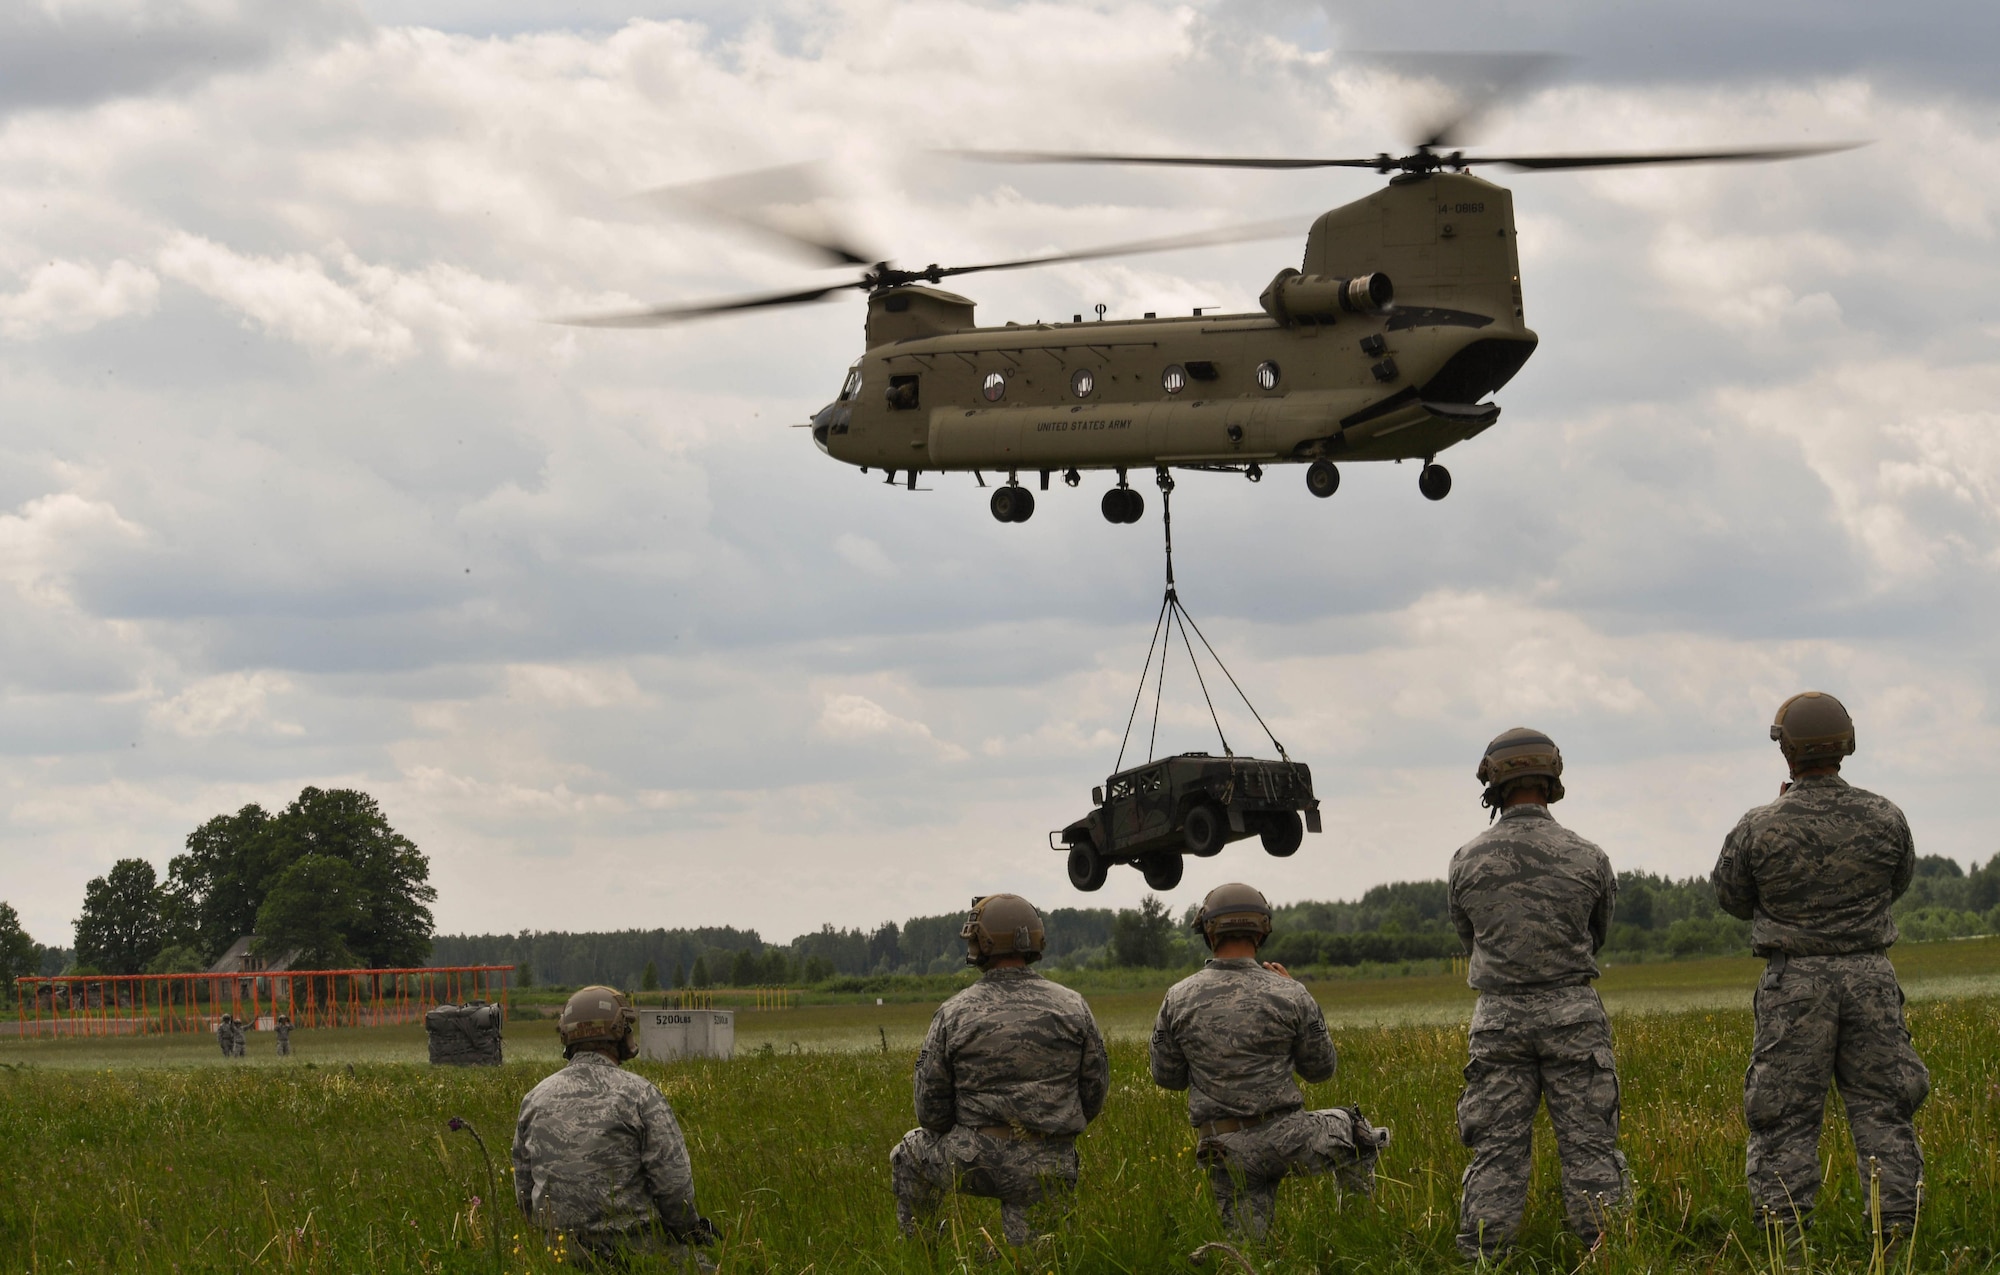 U.S. Air Force Airmen assigned to the 435th Contingency Response Group watch a high mobility multipurpose wheeled vehicle suspended from a U.S. Army CH-47 Chinook for the 435th CRG’s sling load operation during exercise Saber Strike 17 at Lielvarde Air Base, Latvia, June 10, 2017. The 435th CRG Airmen rigged the HUMVEE to the Chinook and were watching to make sure it had been rigged properly. Saber Strike 17 highlights the inherent flexibility of ground and air forces to rapidly respond to crises allowing for the right presence where it is needed, when it is needed. (U.S Air Force photo by Senior Airman Tryphena Mayhugh)